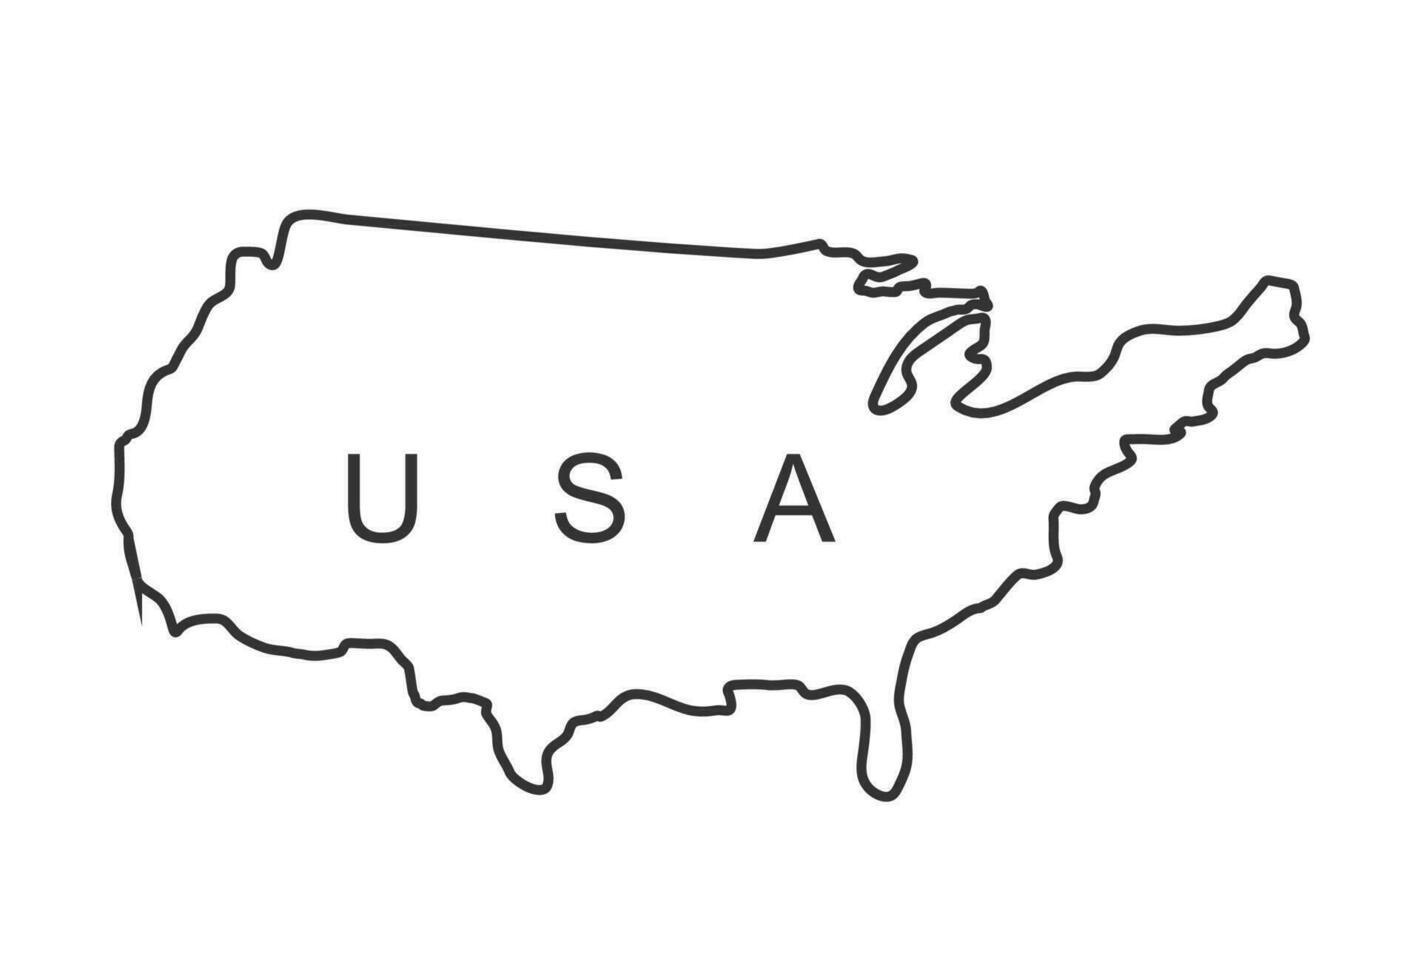 USA map. Outline of the USA in black on a white background. America. vector map